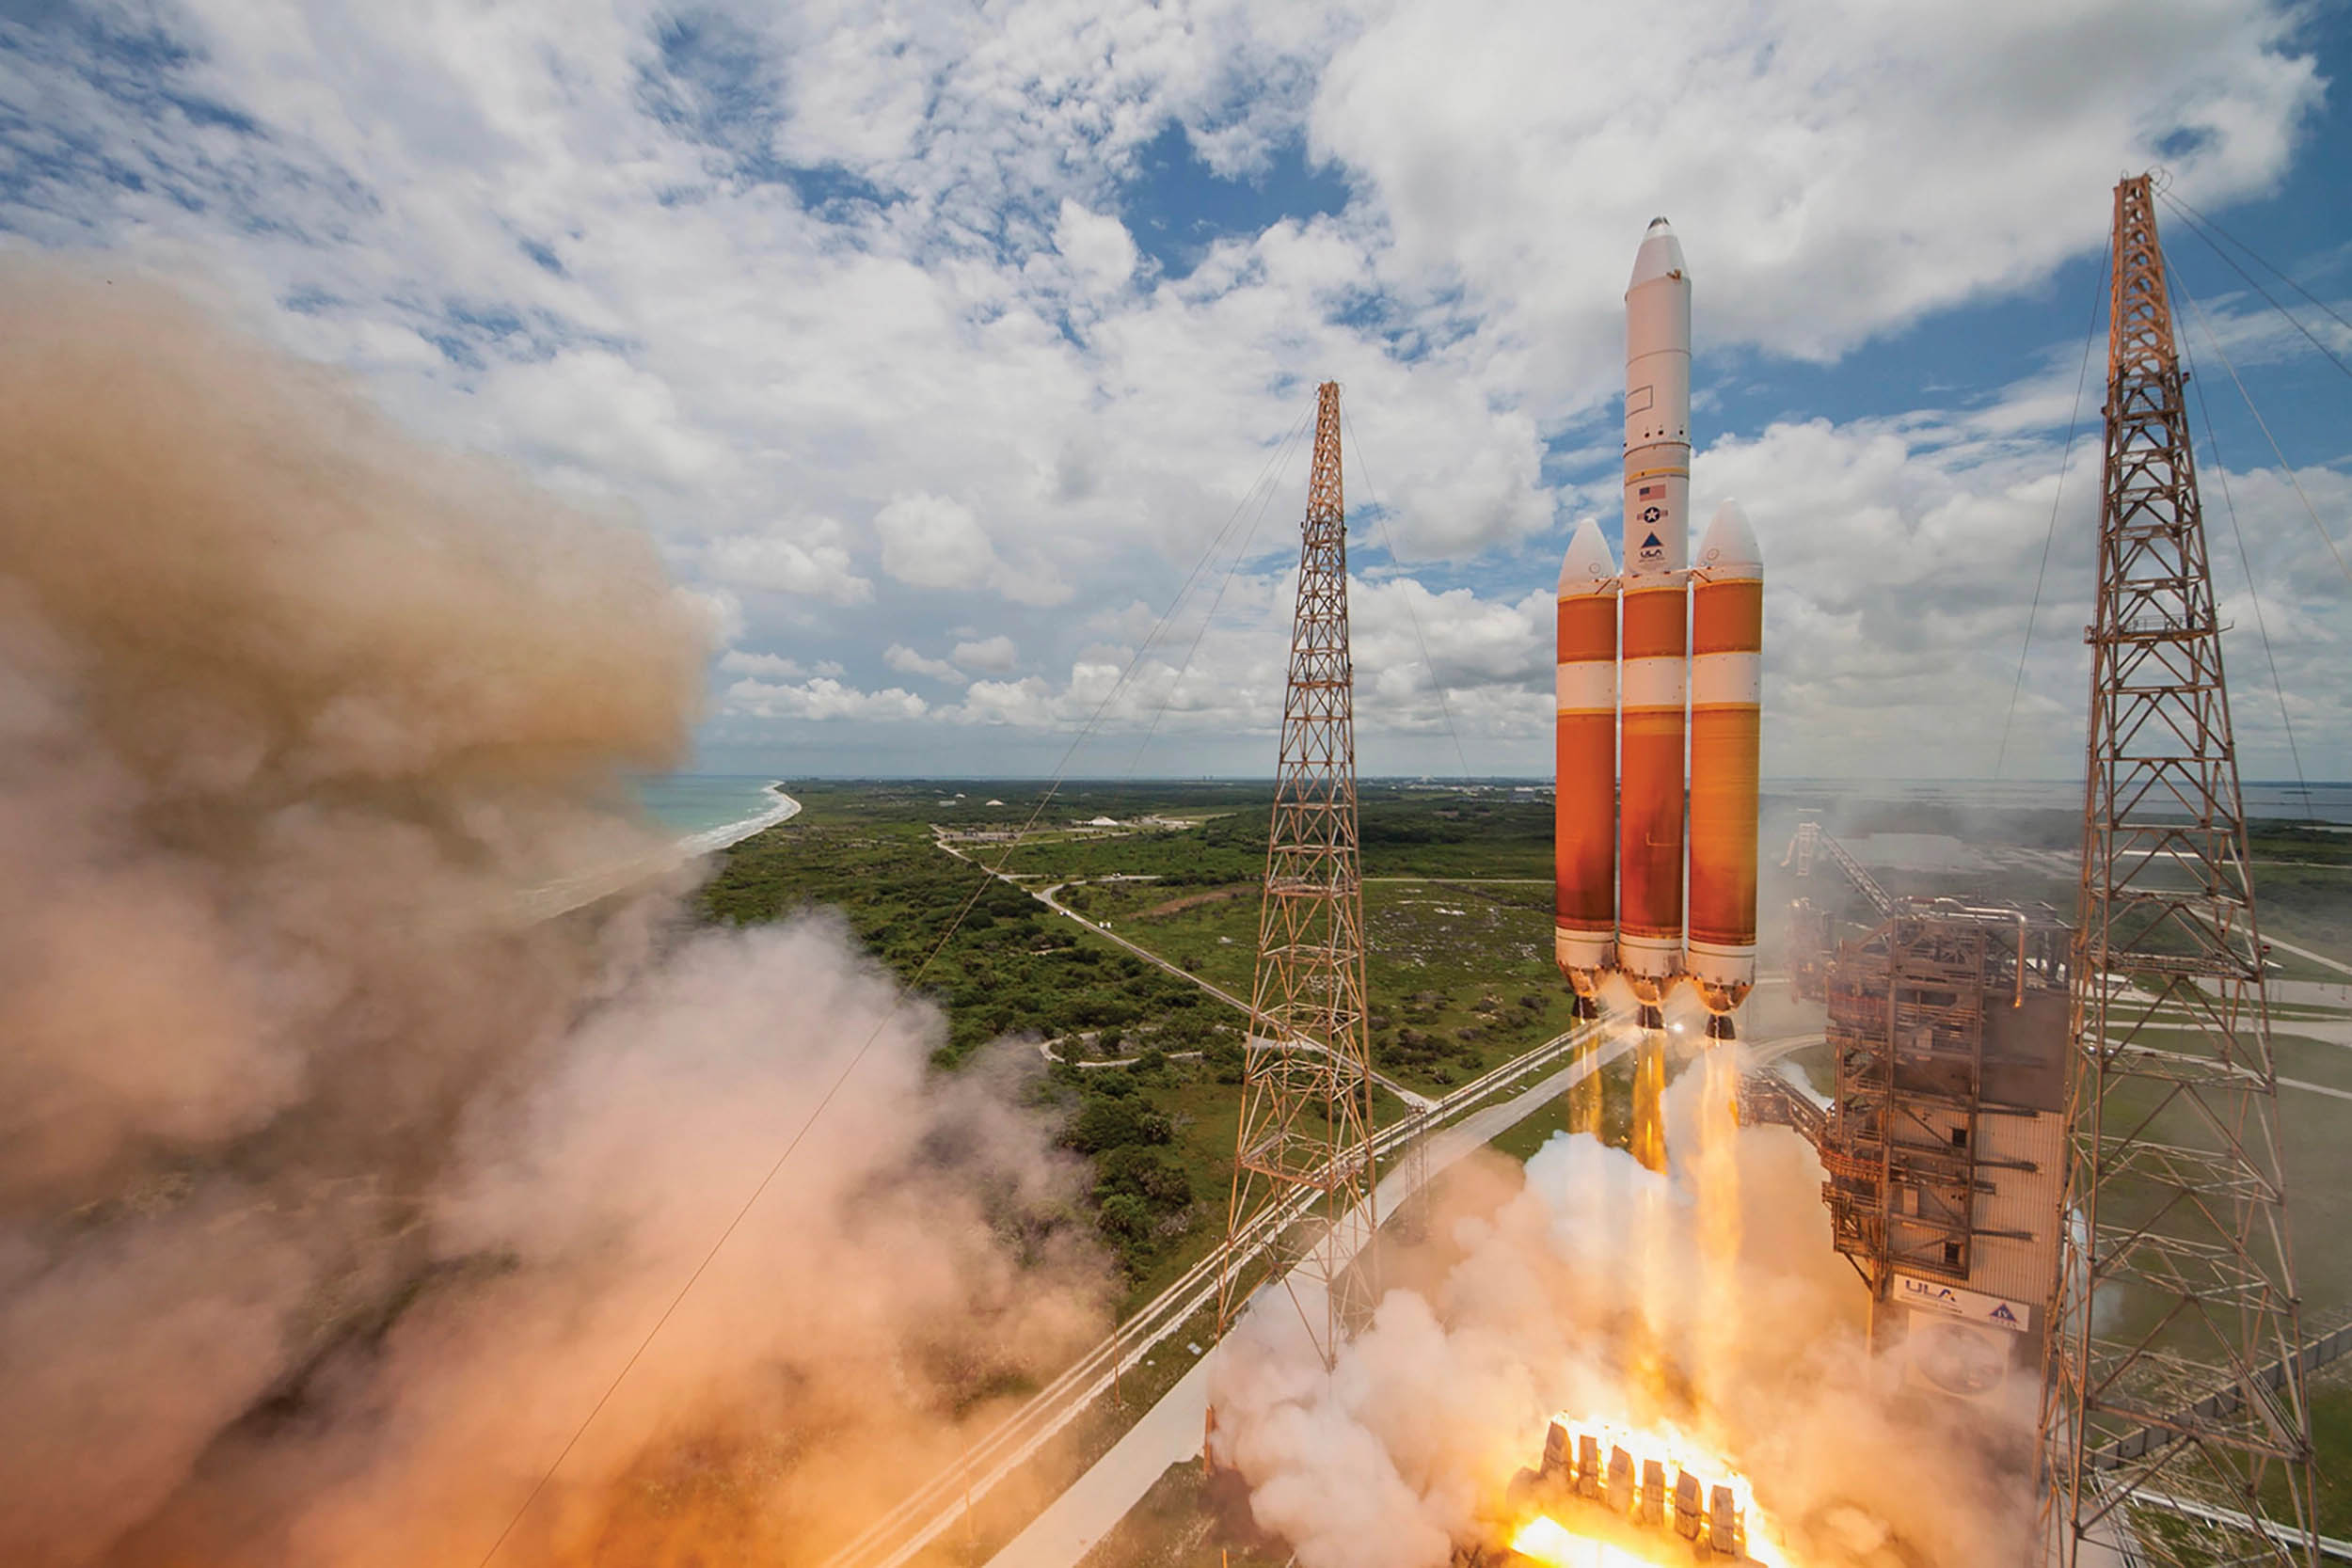 United Launch Alliance Delta IV-Heavy rocket lifts off from Space Launch Complex 37B at Cape Canaveral Air Force Station, Florida, June 11, 2016, carrying classified national security payload for U.S. National Reconnaissance Office (Courtesy United Launch Alliance)